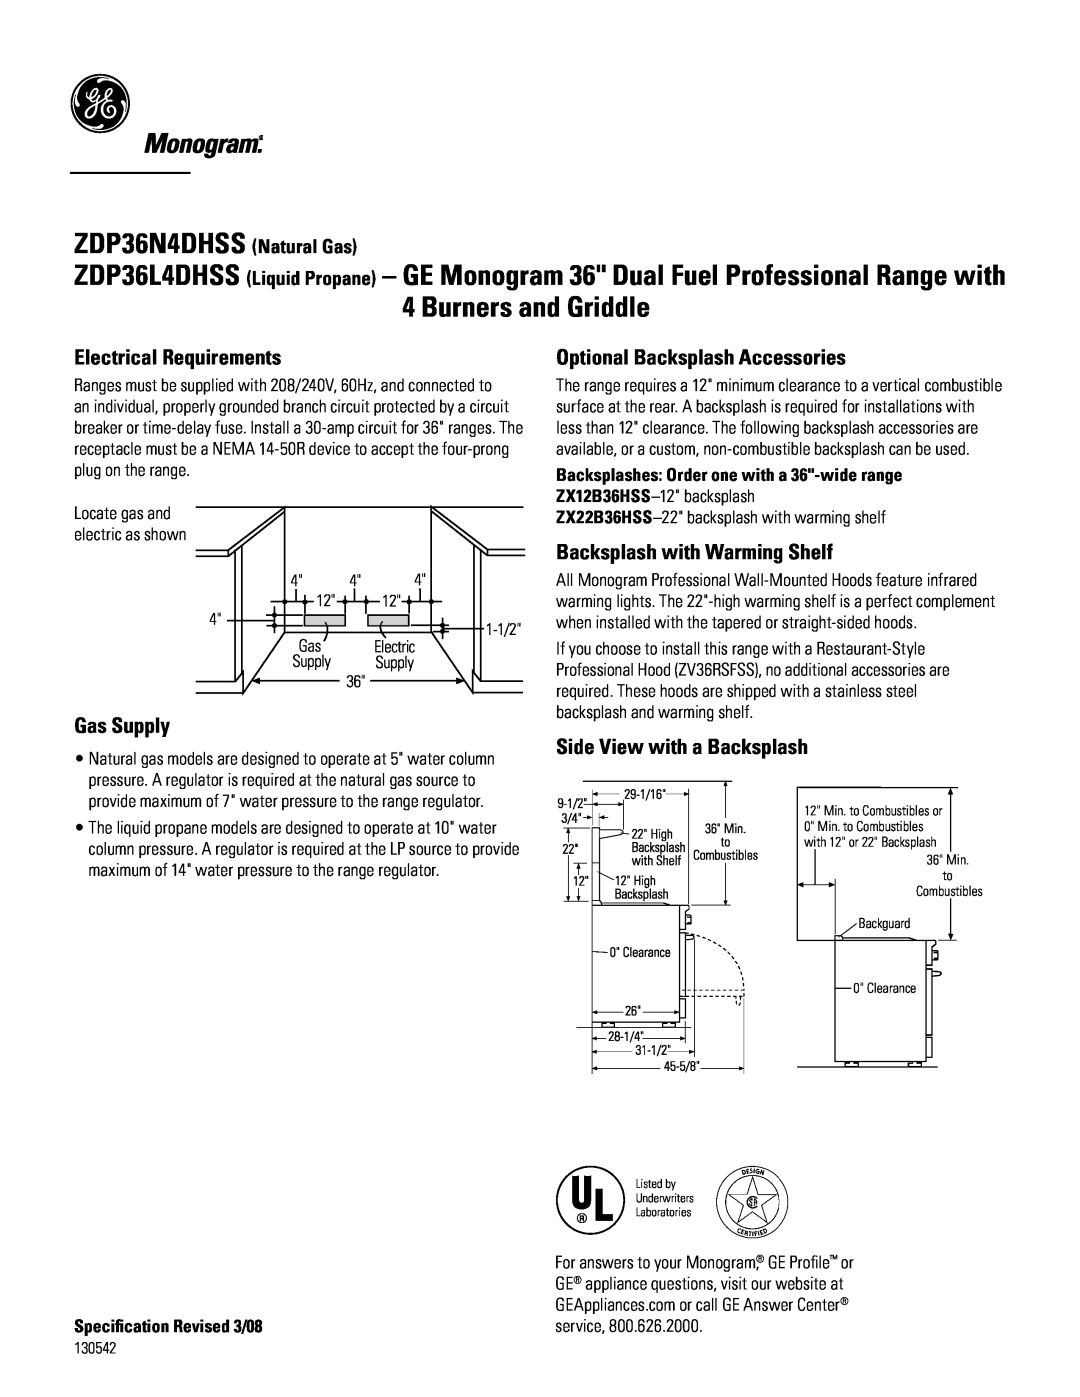 GE Monogram ZDP3614DHSS Electrical Requirements, Gas Supply, Optional Backsplash Accessories, Side View with a Backsplash 